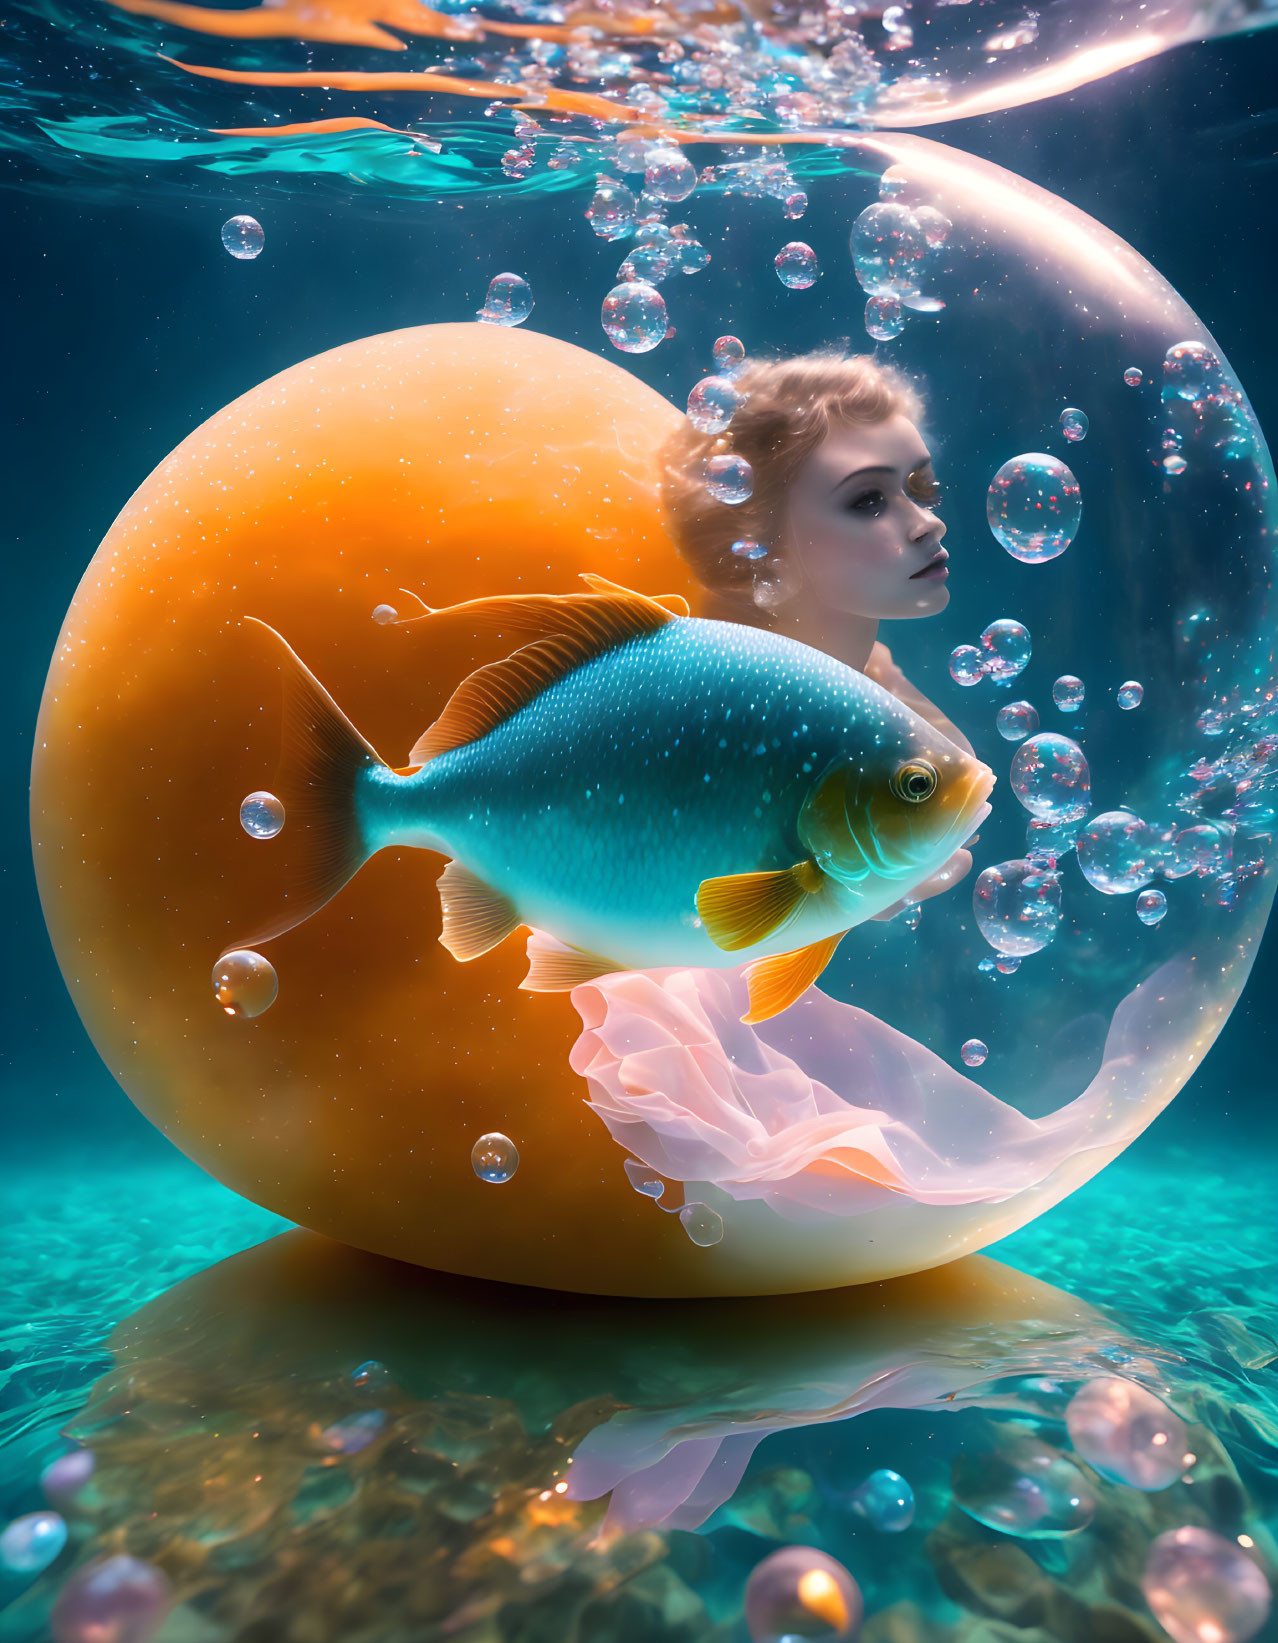 Woman and fish in bubble in surreal underwater scene